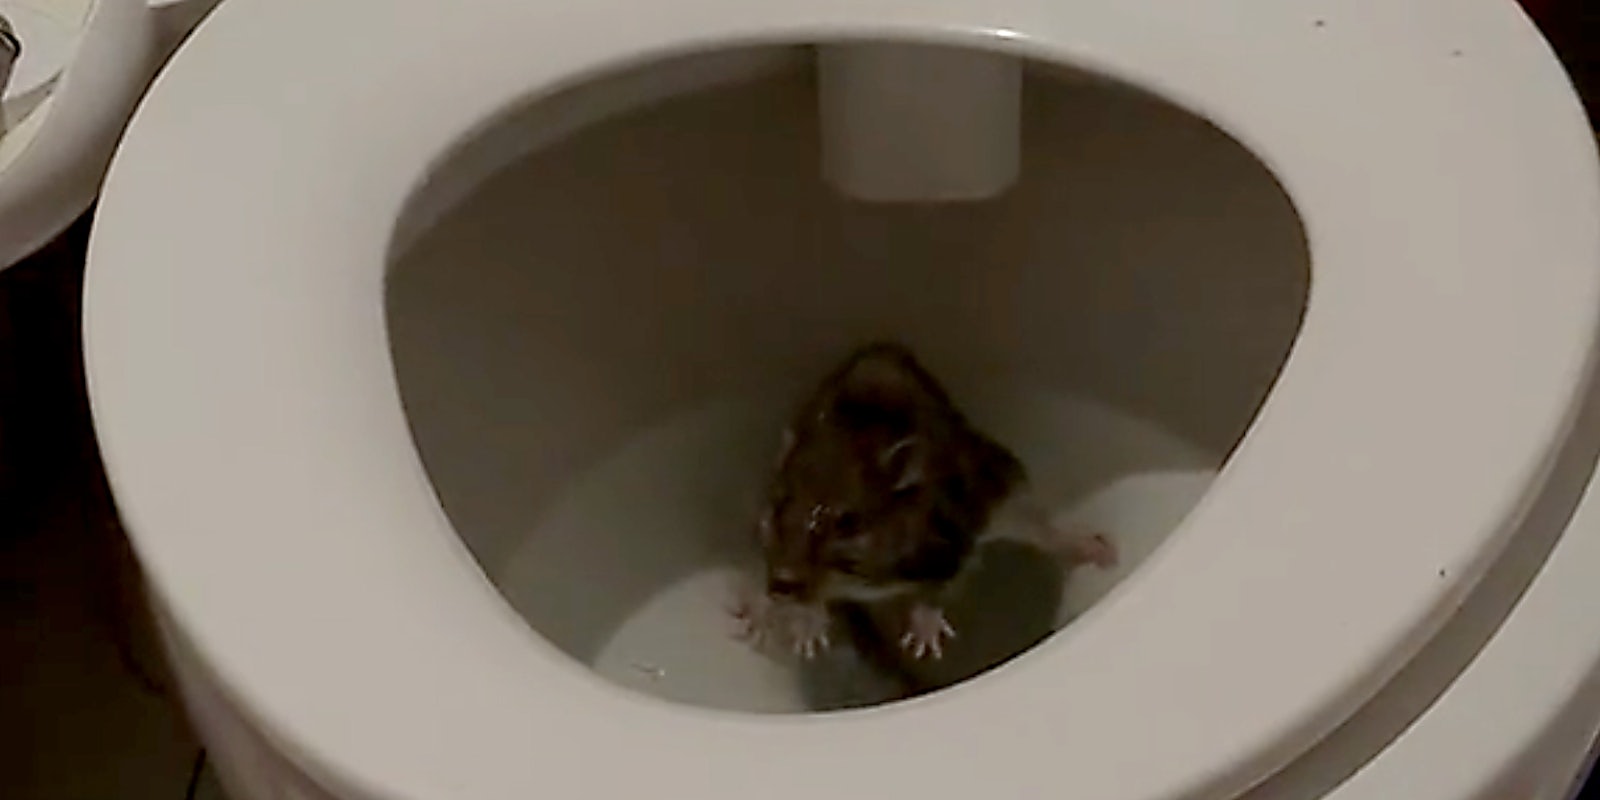 A rat in a toilet.